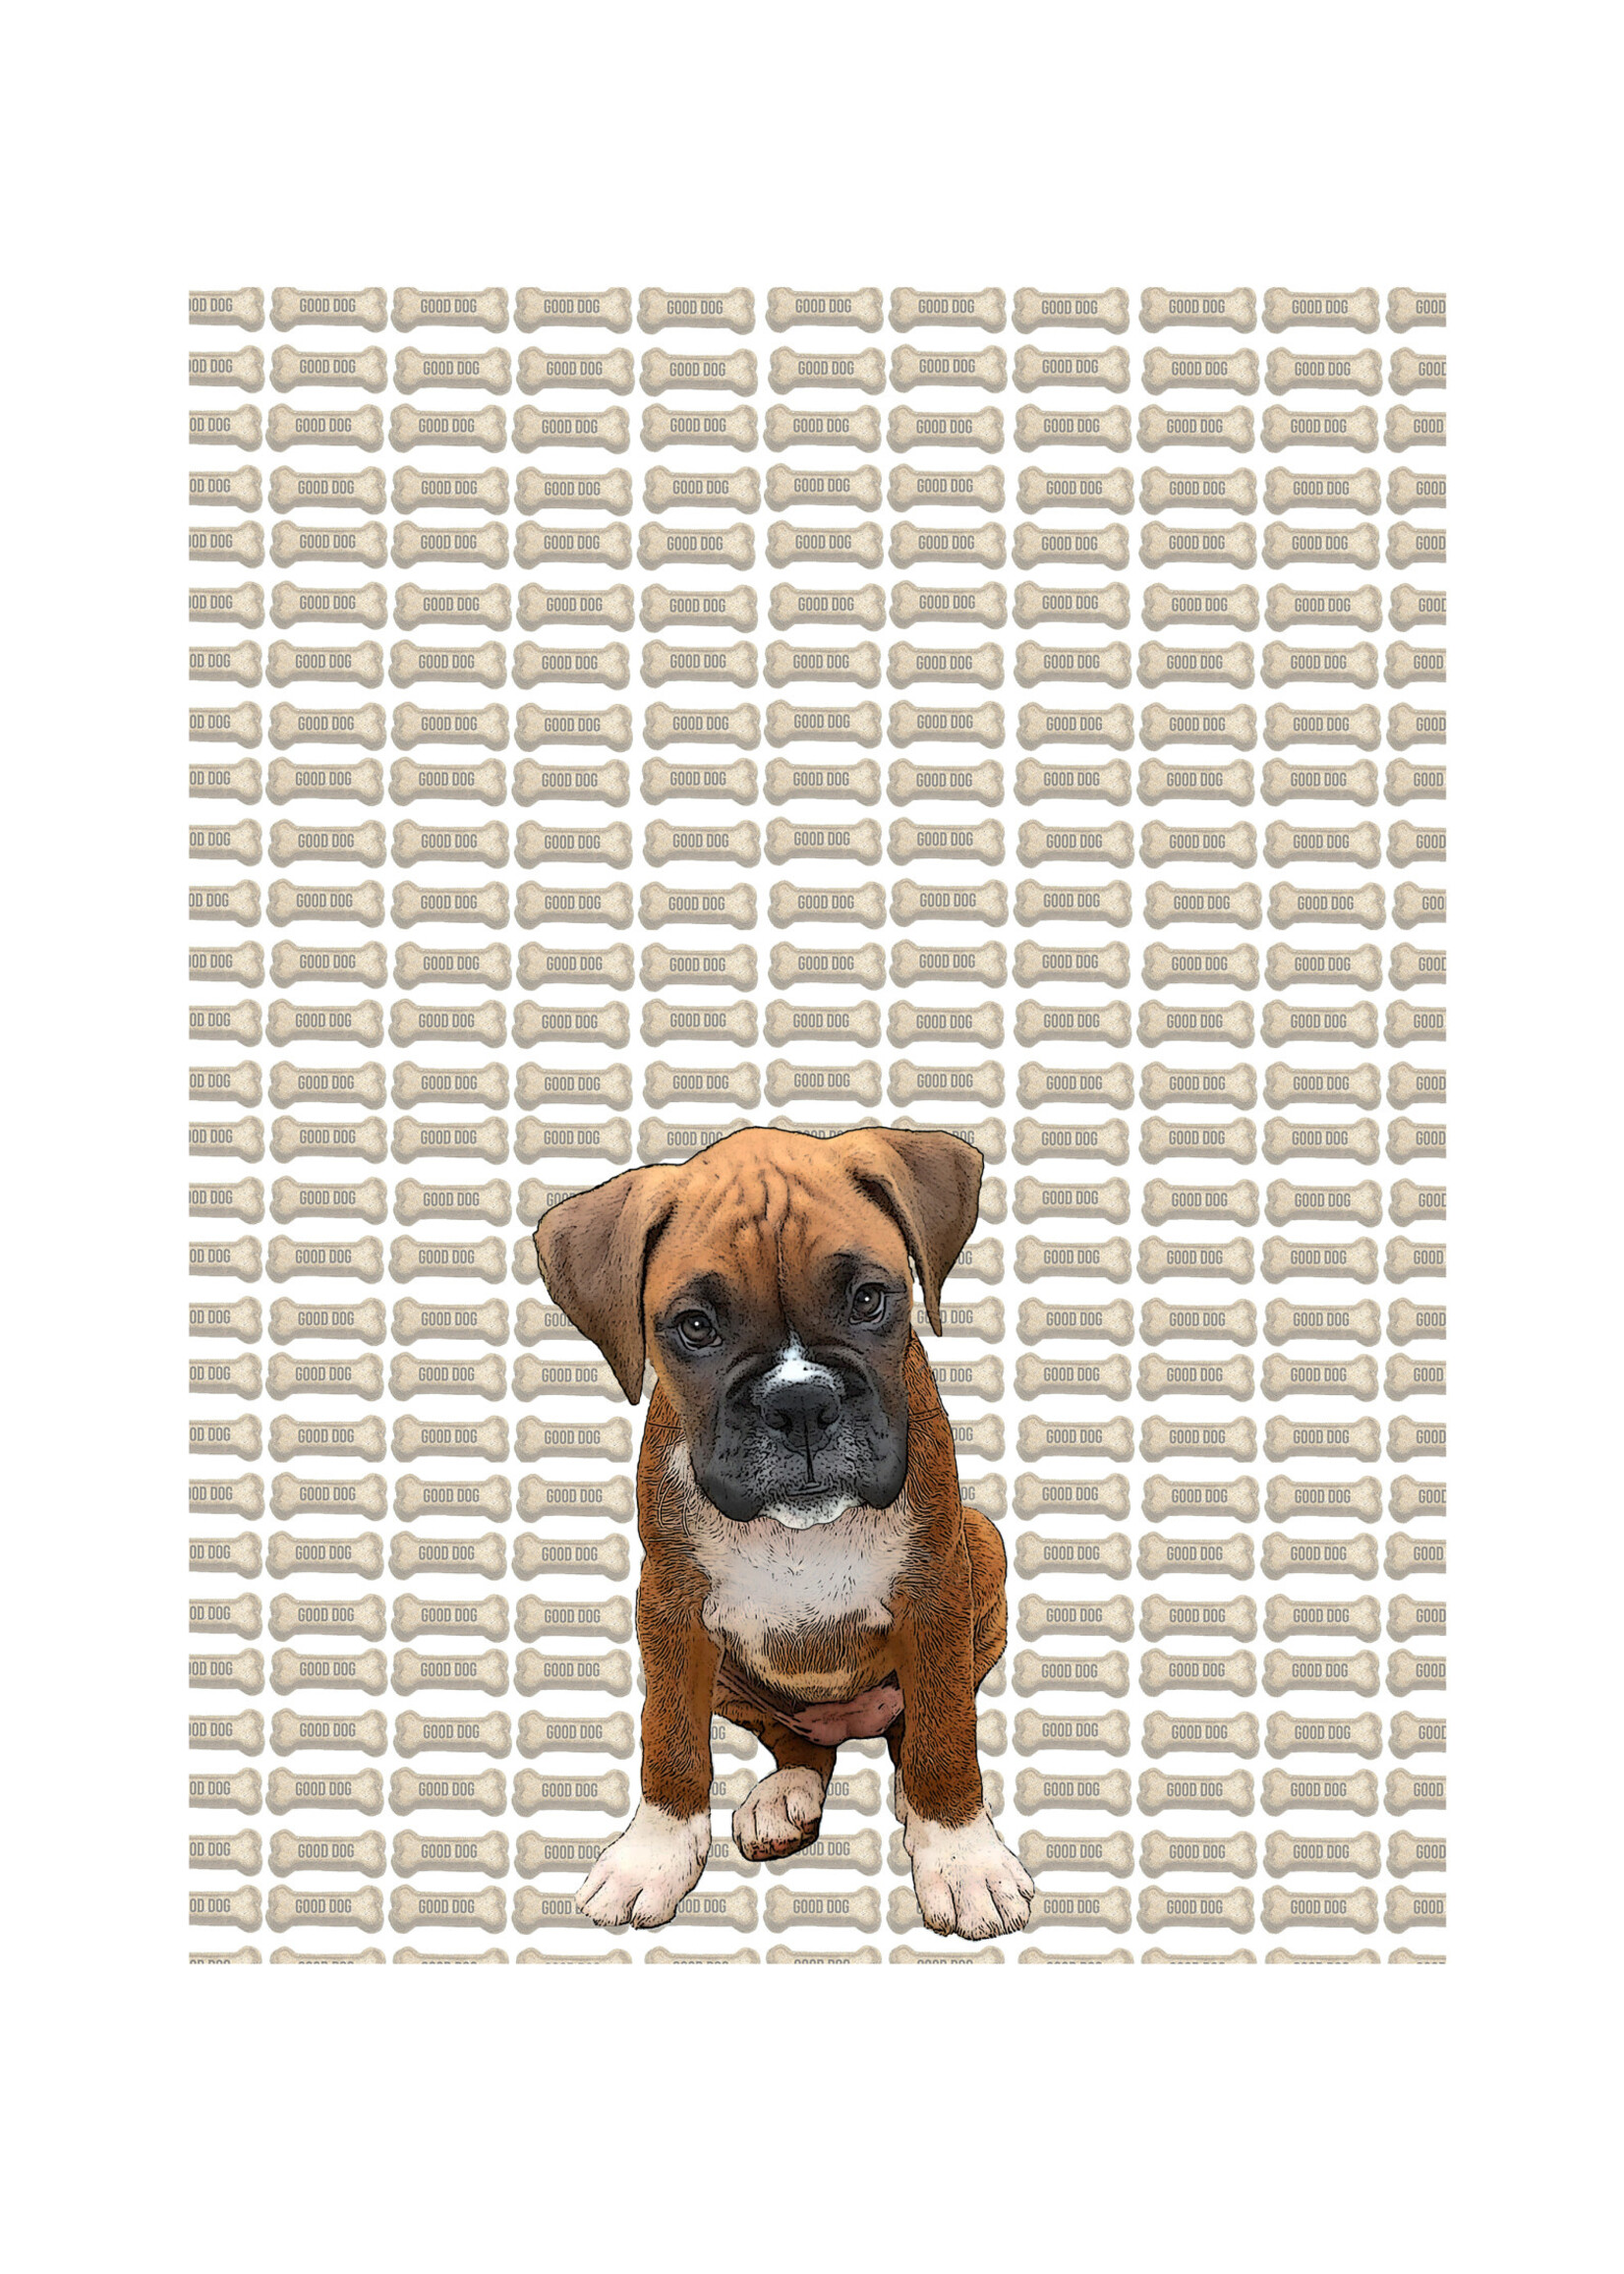 Alphie and Ollie boxer puppy kitchen towel 18 x 24 inches flour sack material